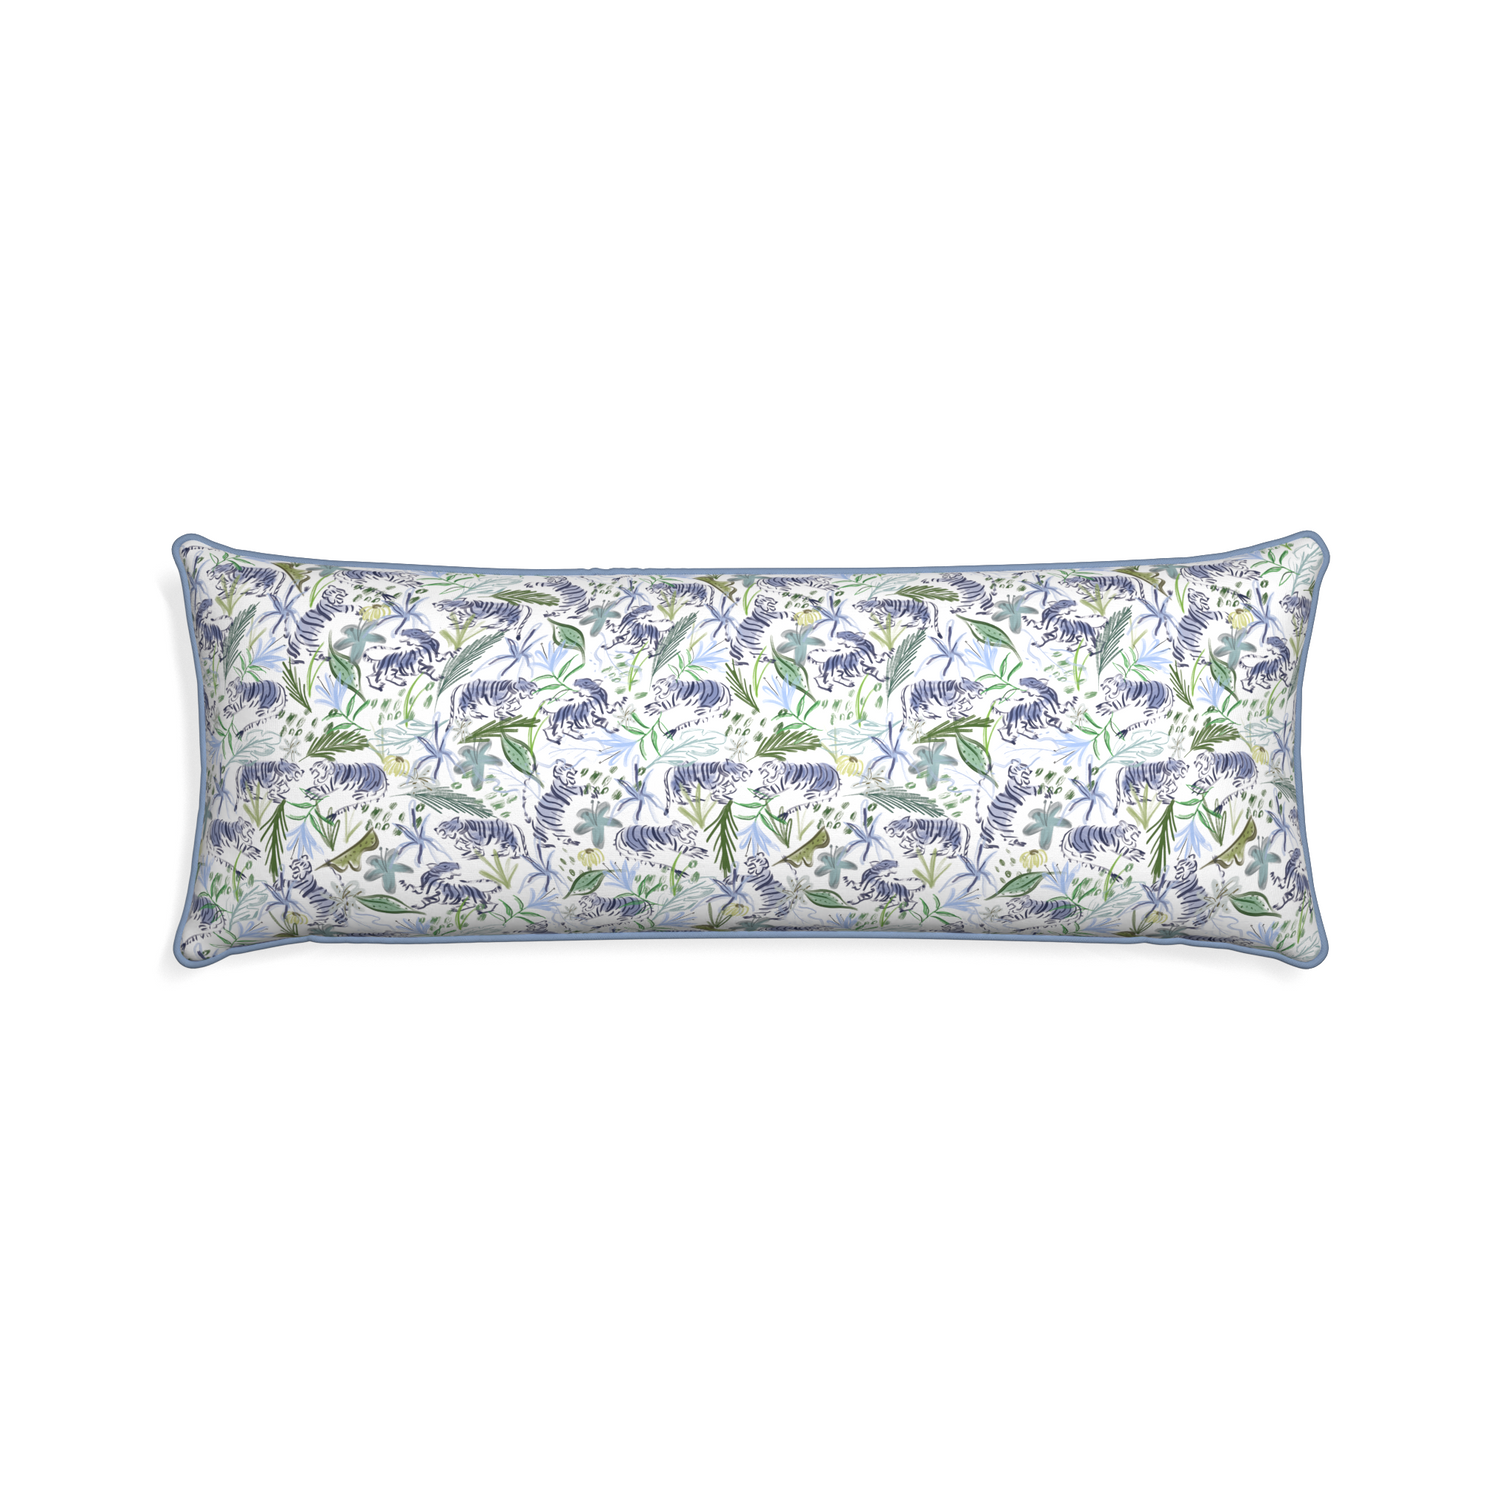 Xl-lumbar frida green custom green tigerpillow with sky piping on white background